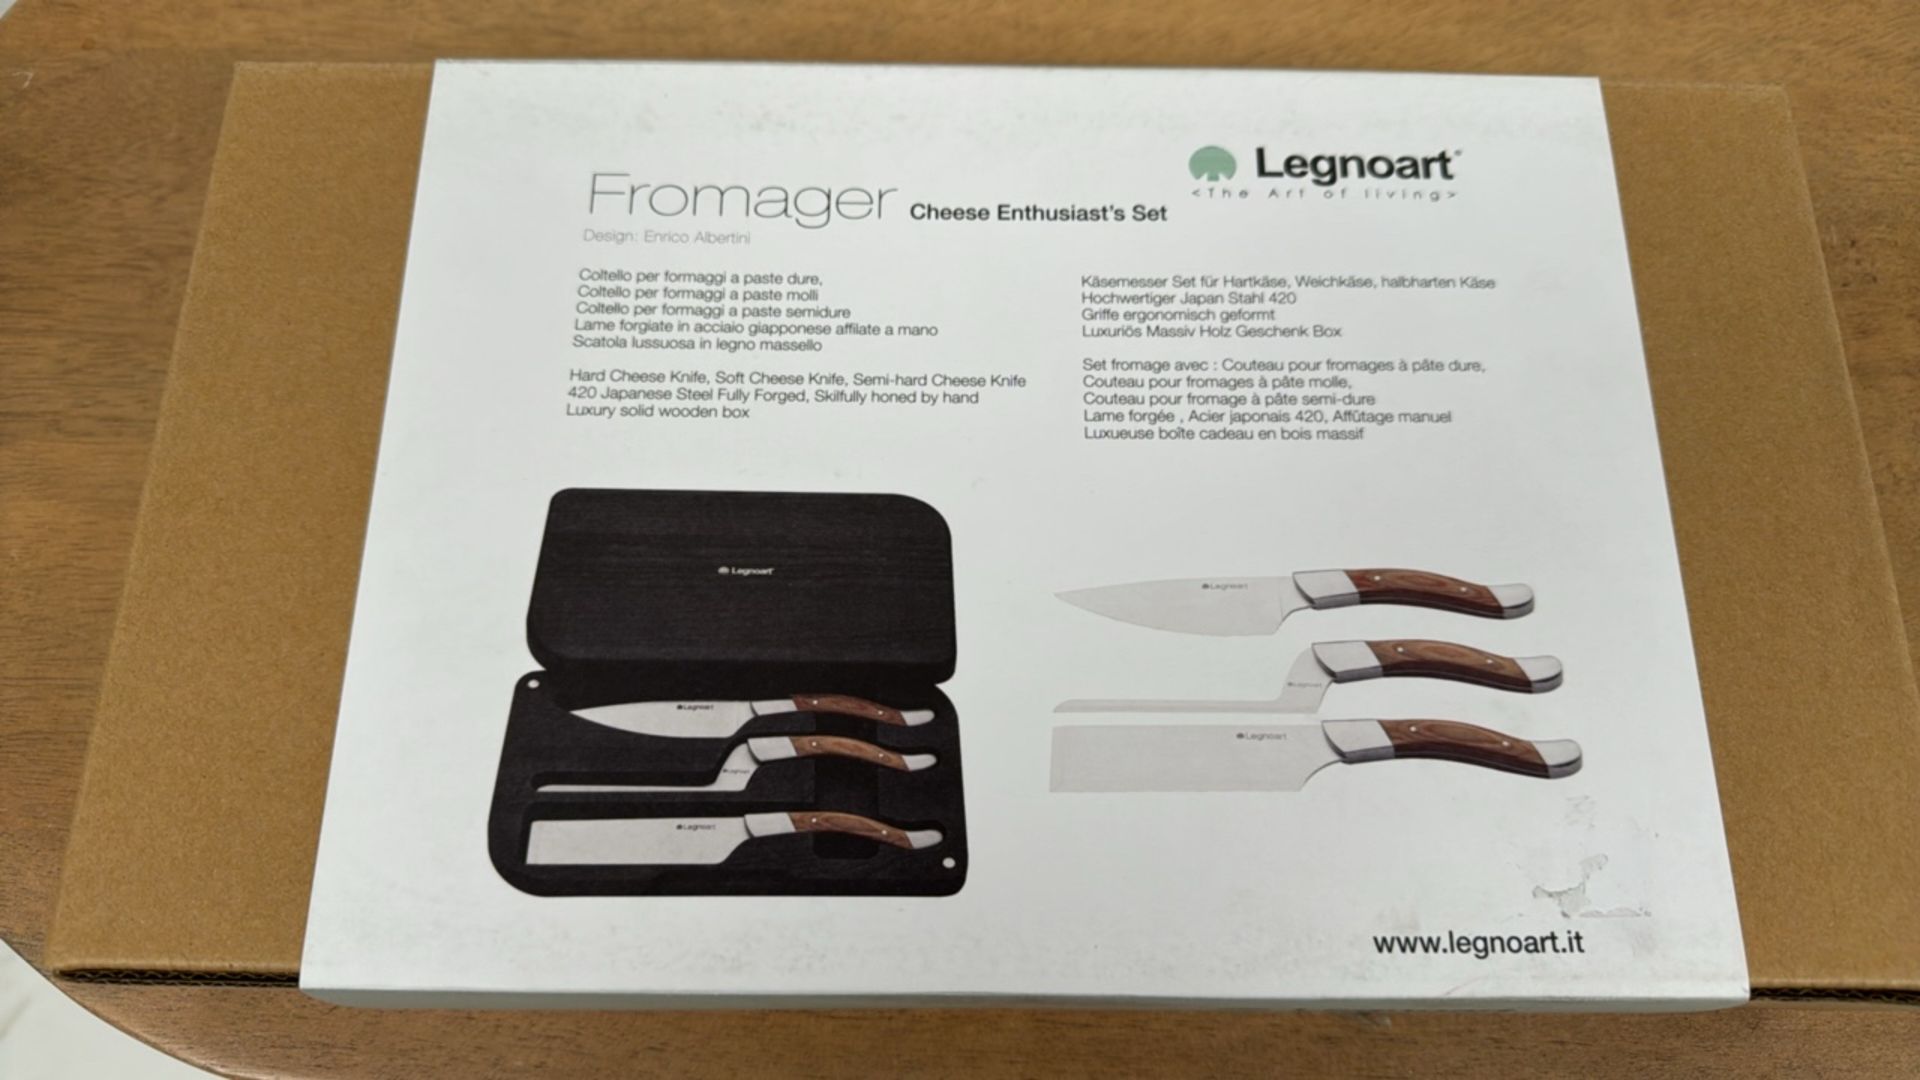 Legnoart Fromager Cheese Enthusiast Set - Image 2 of 5